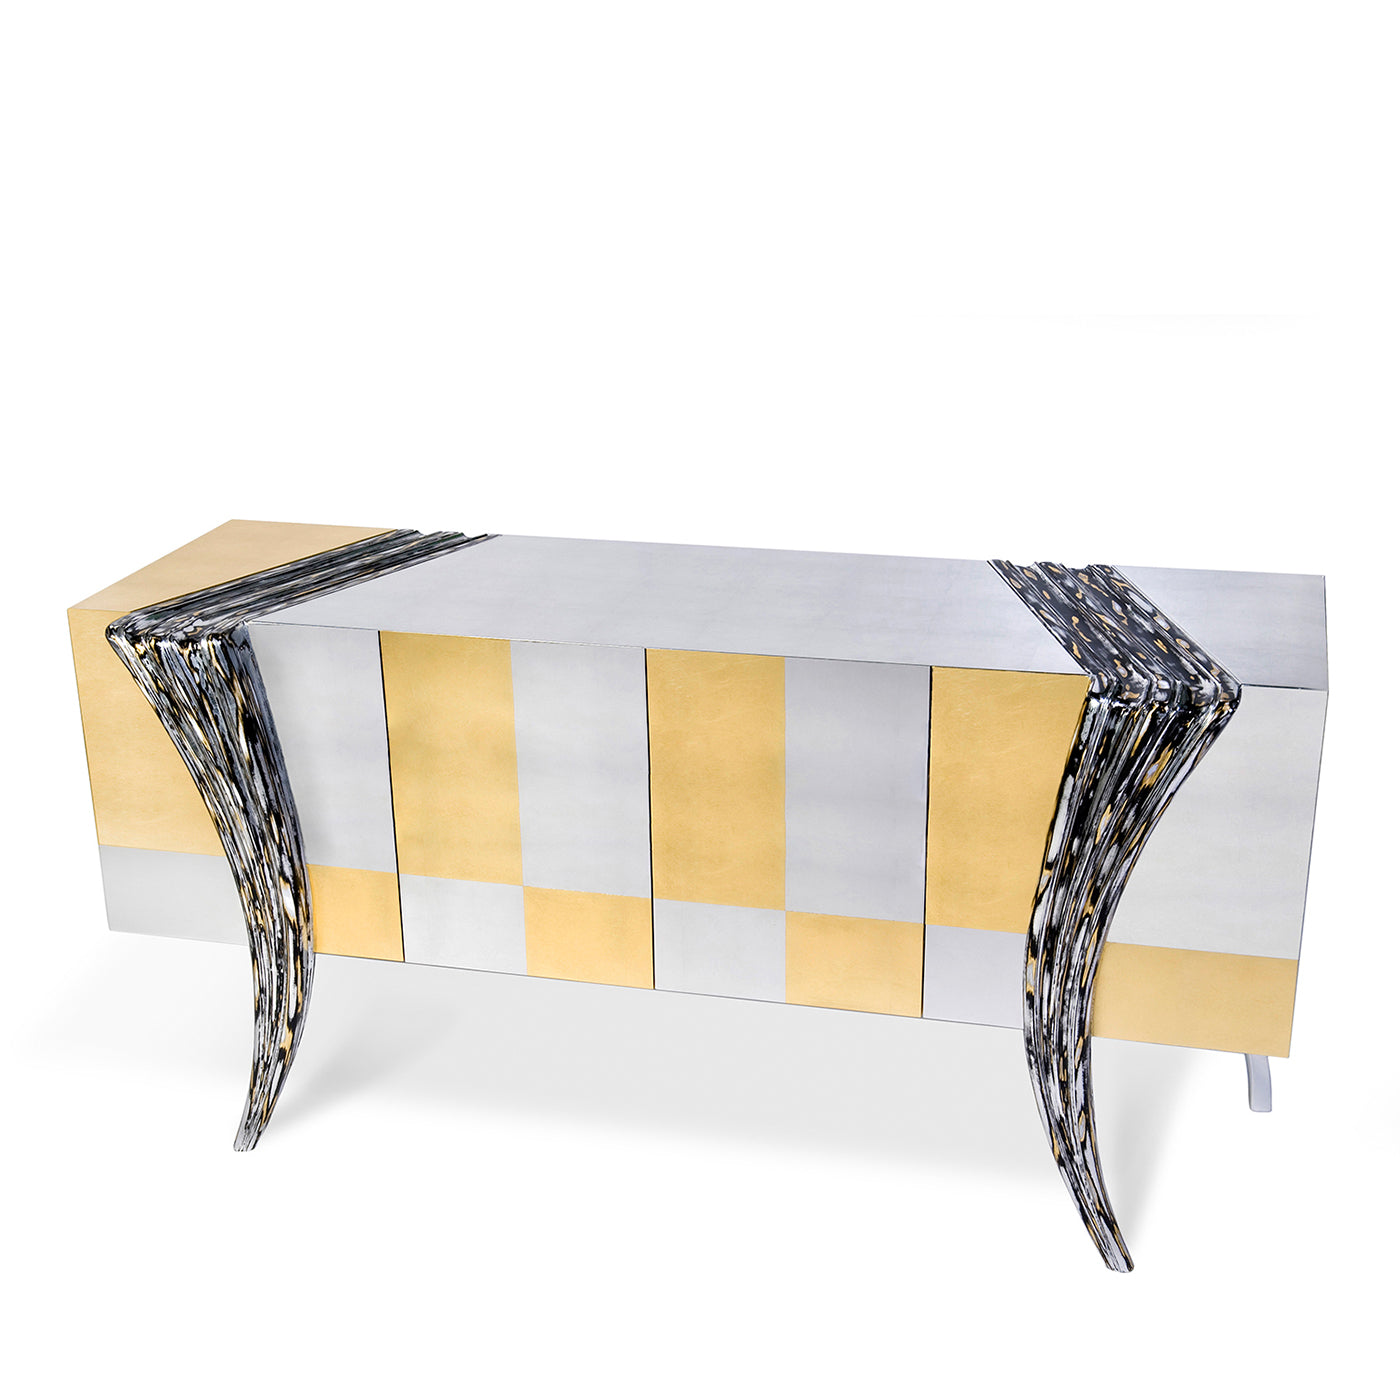 Opus Futura Gold and Silver Sideboard by Carlo Rampazzi - Alternative view 1